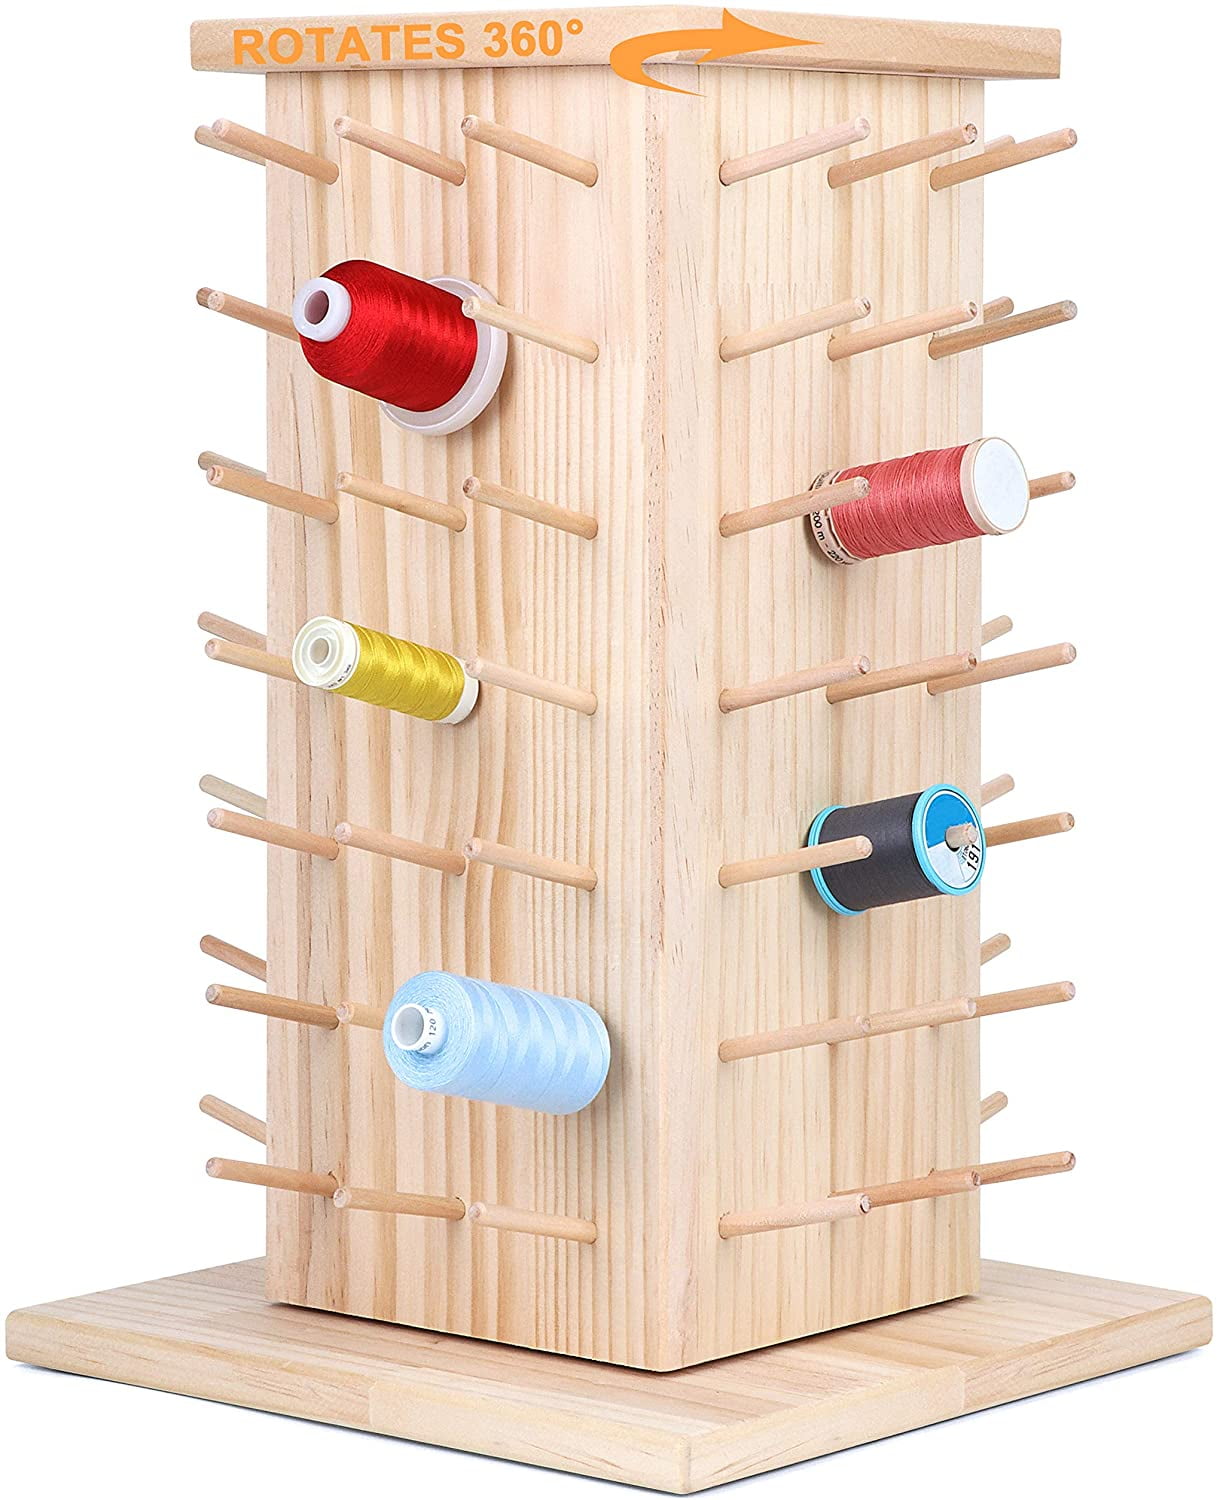 Made of Hardwood Sturdy Freestanding or Wall Mount Threadart 60 Spool Cone Wood Thread Rack 3 Sizes Available